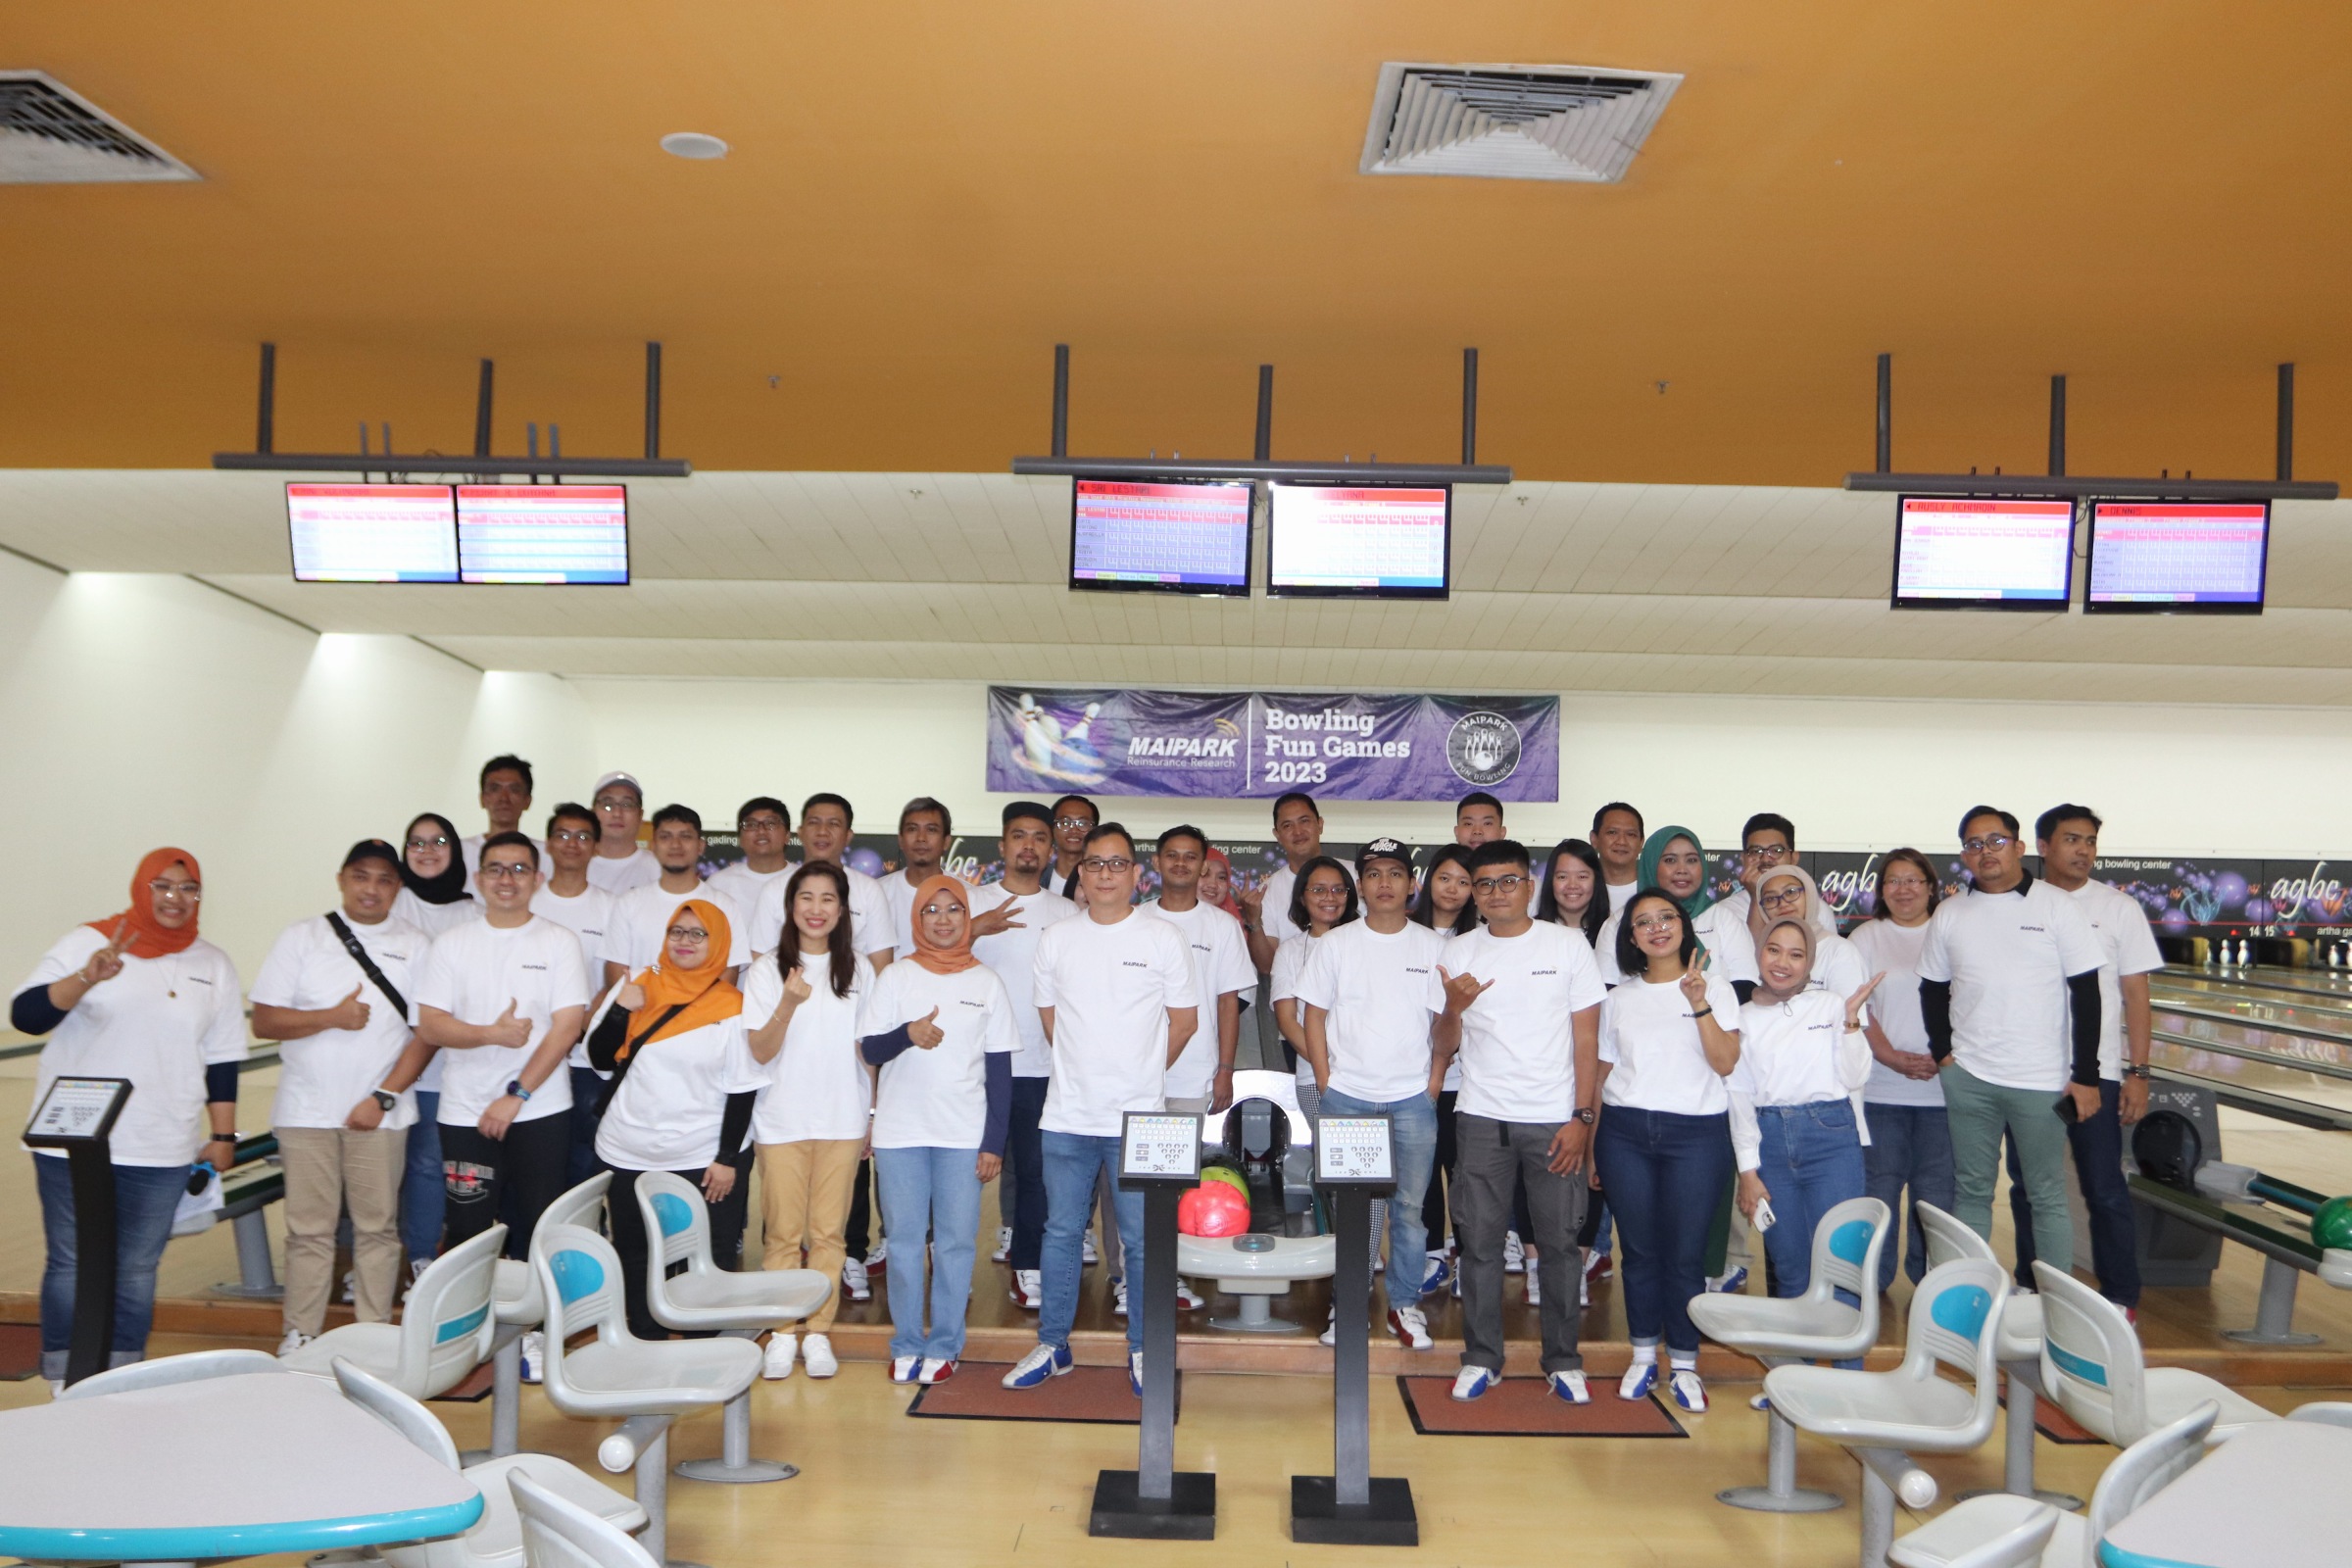 MAIPARK Bowling Fun Games 2023 session 3 was held again